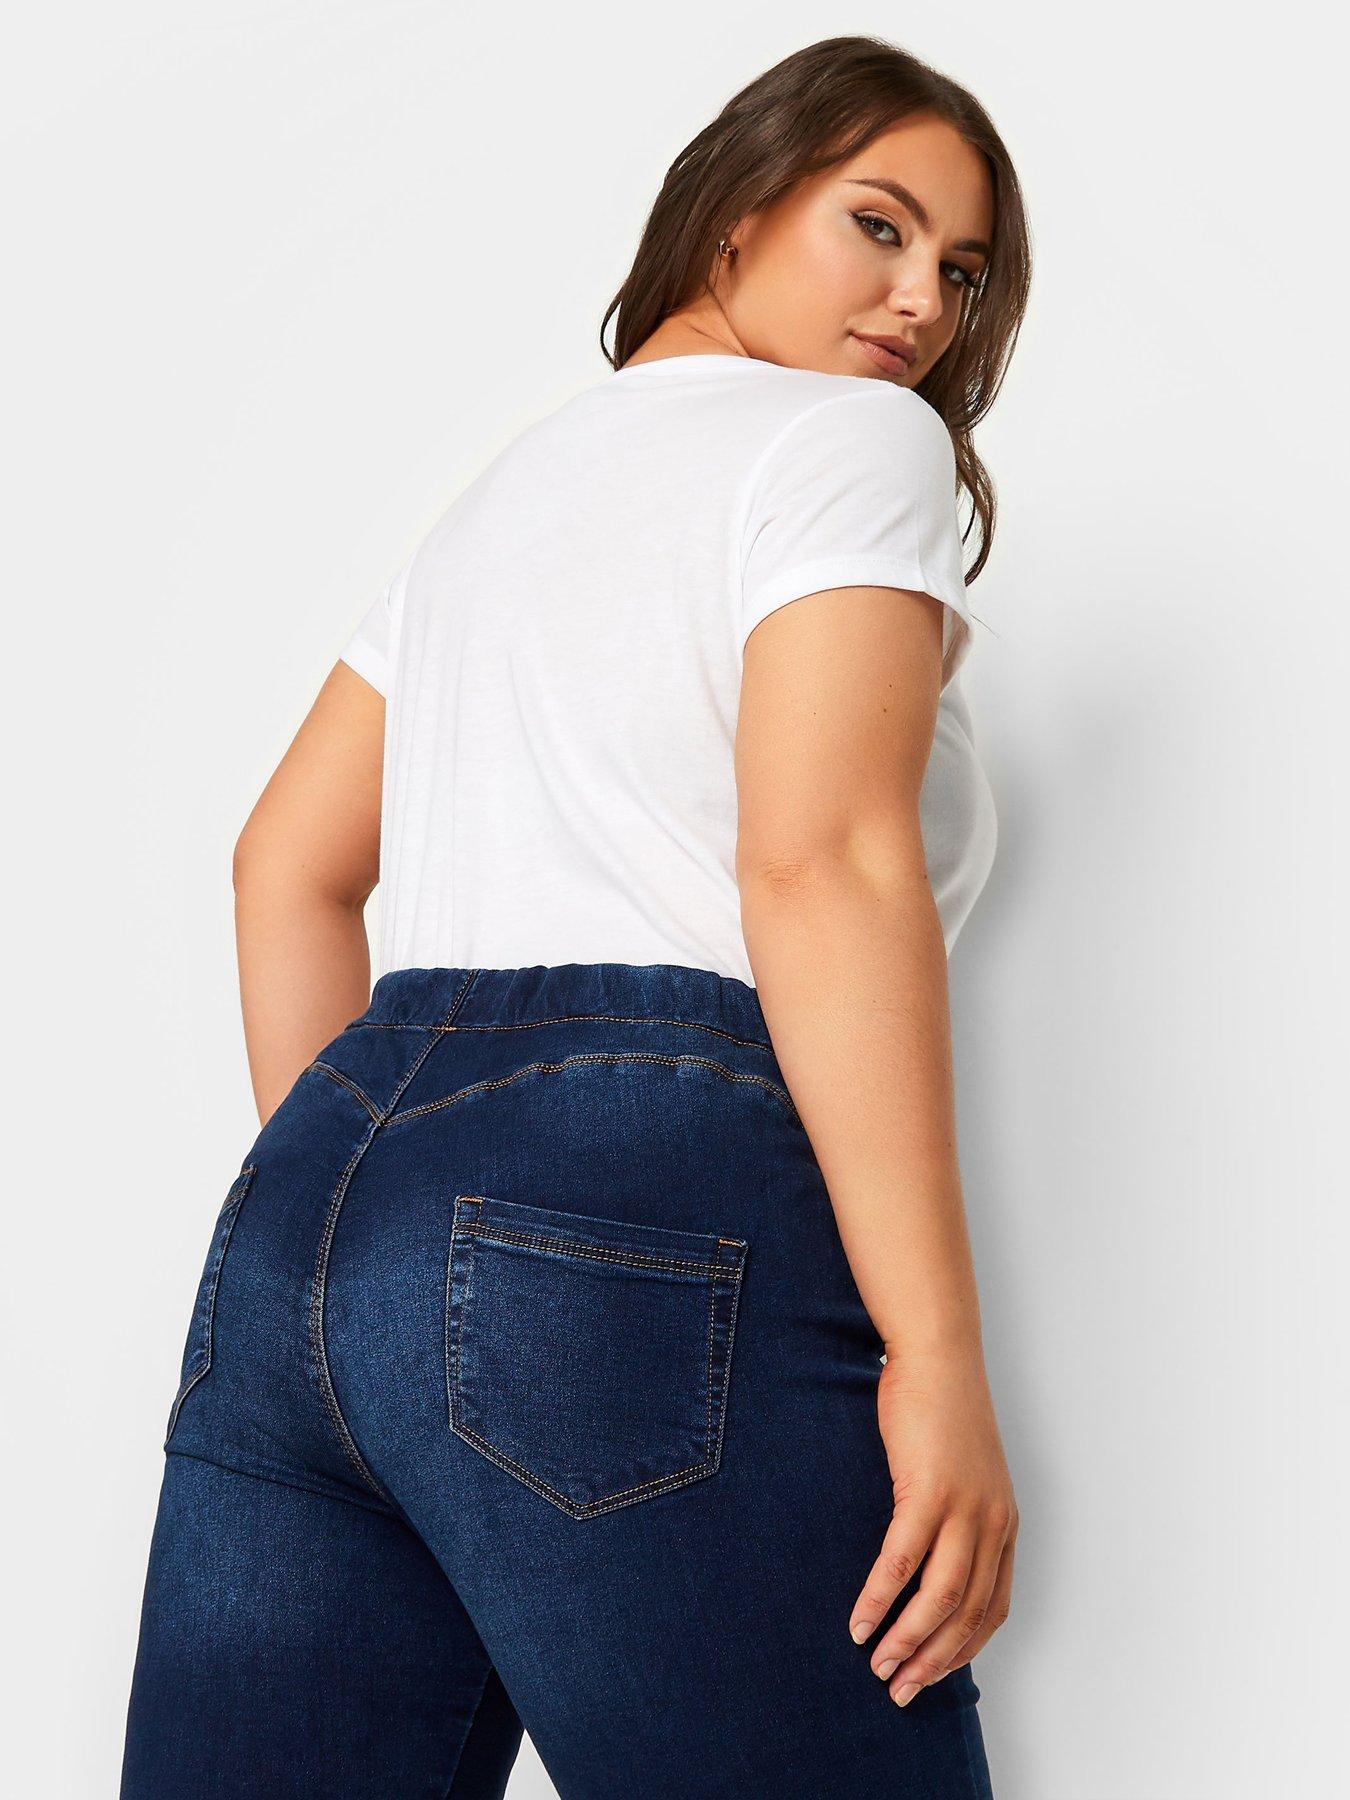  Yours YOURS FOR GOOD Bum Shaper Jeggings - Indigo